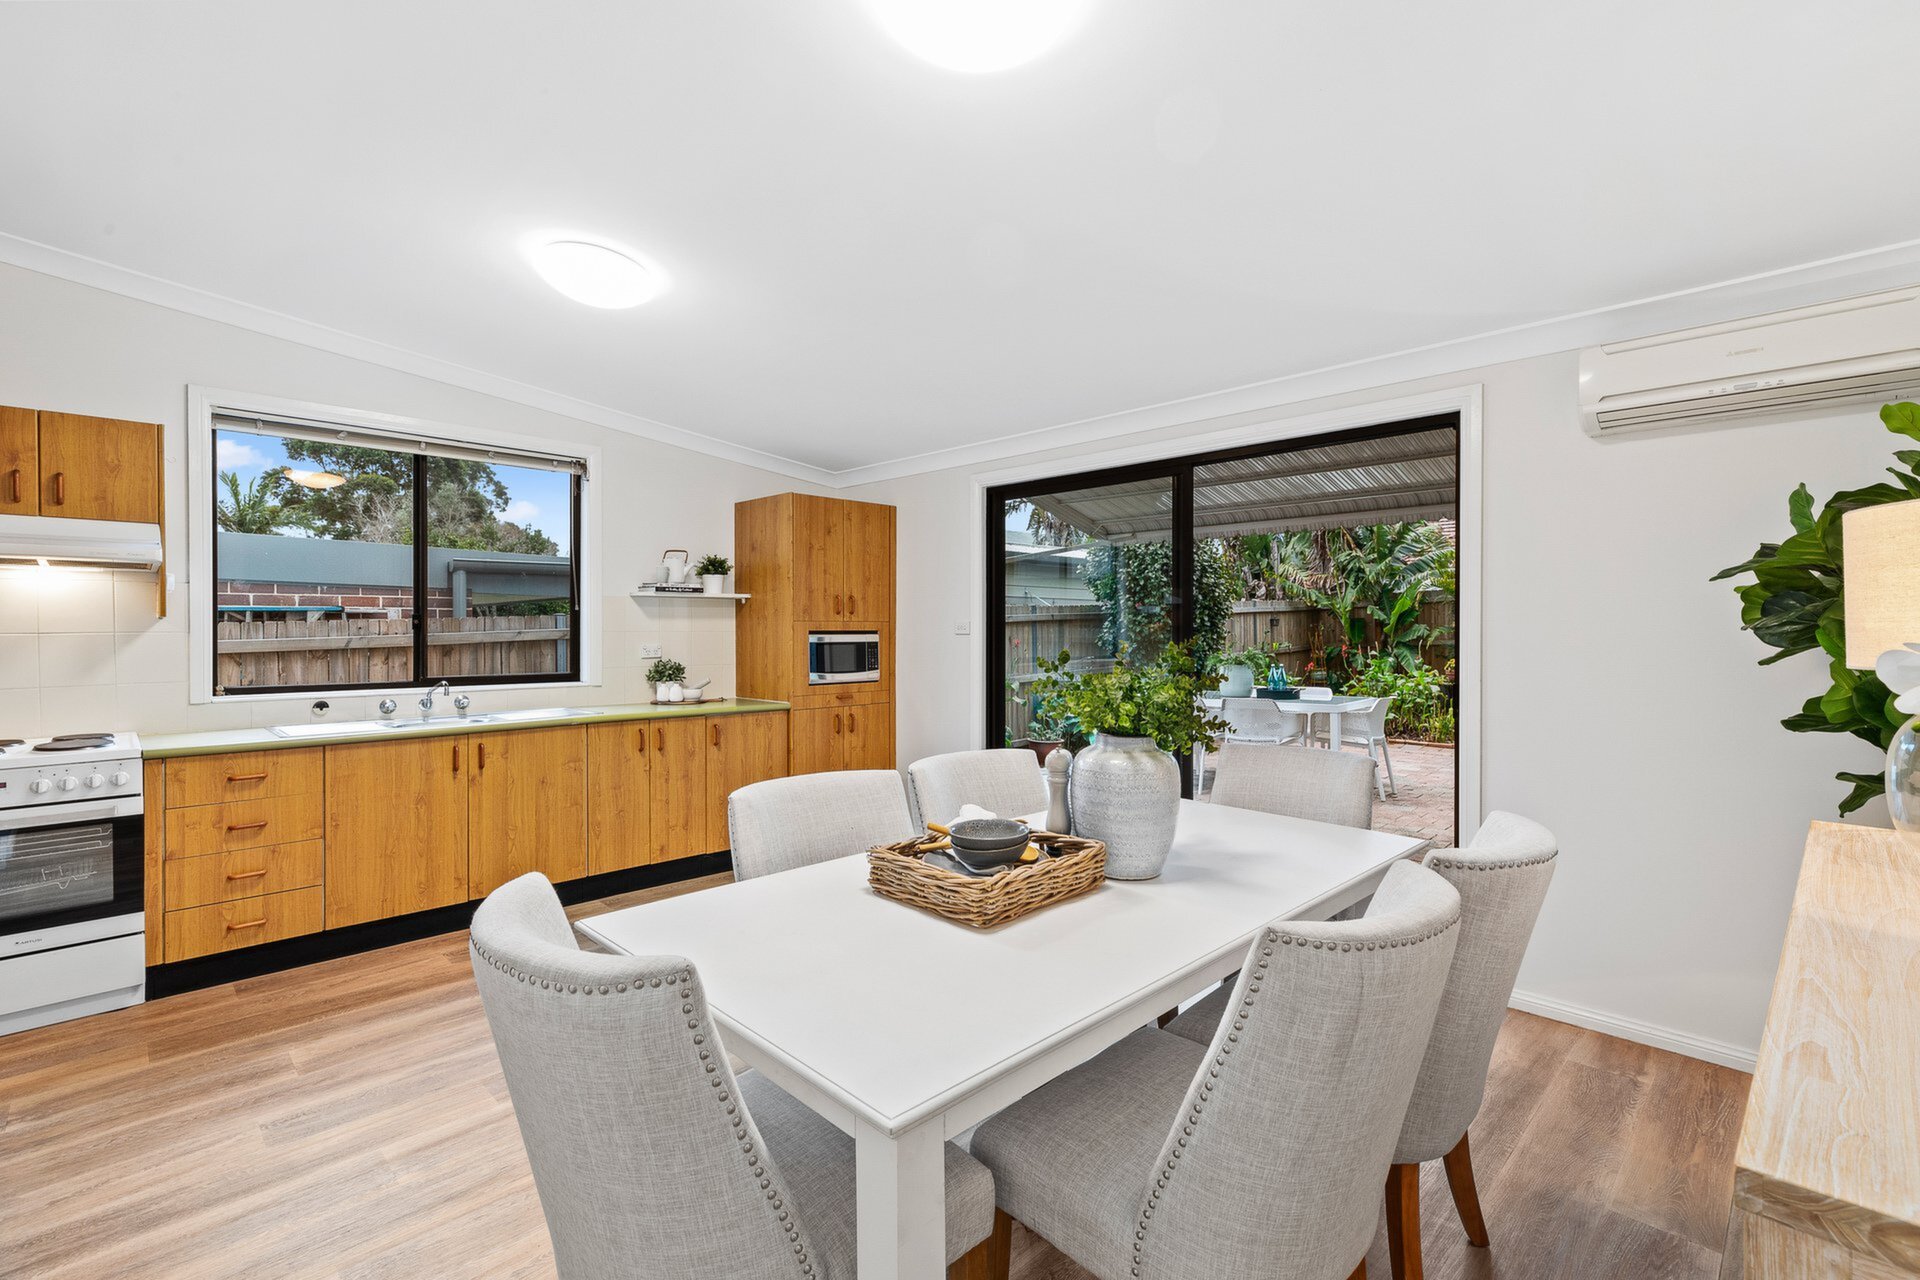 15 Tyrell Street, Gladesville Sold by Cassidy Real Estate - image 1